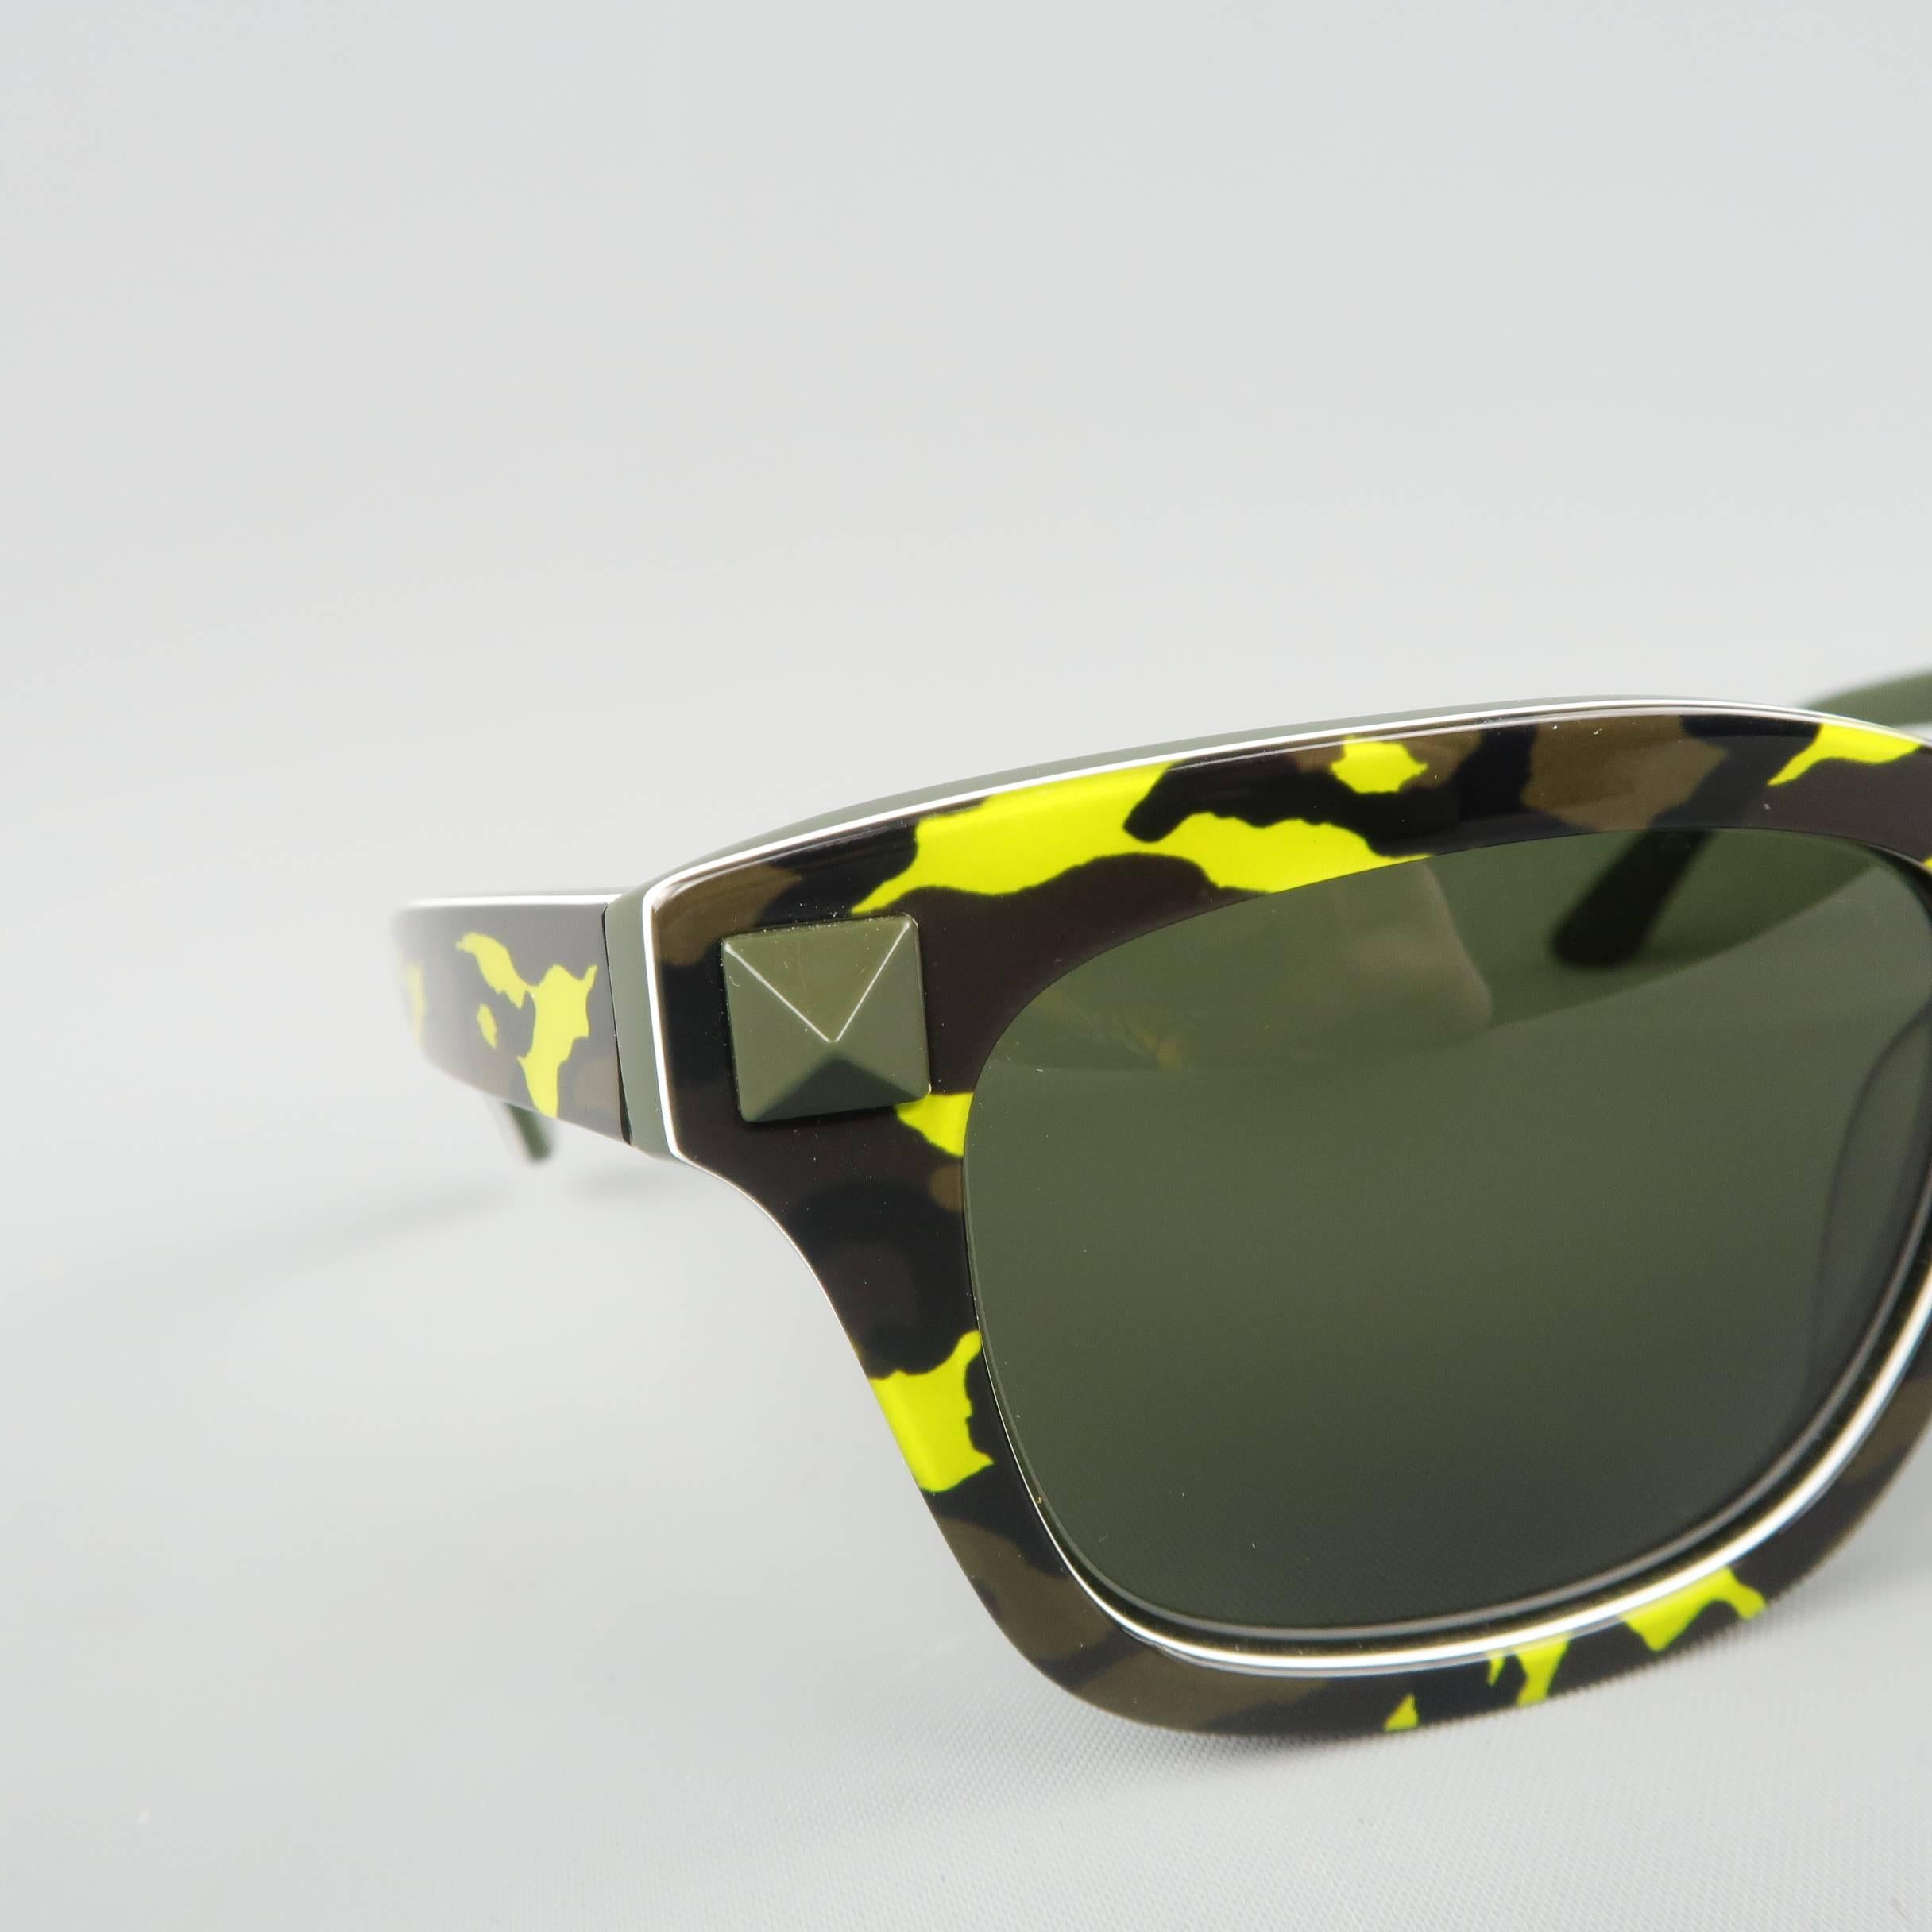 VALENTINO wayfarer sunglasses come in olive and lime green camouflage print acetate with black lenses and olive pyramid stud detail. Made in Italy.
 
New with Tags. Retails at $375
 
Measurements:
 
Length: 15 cm.
Height: 5 cm.